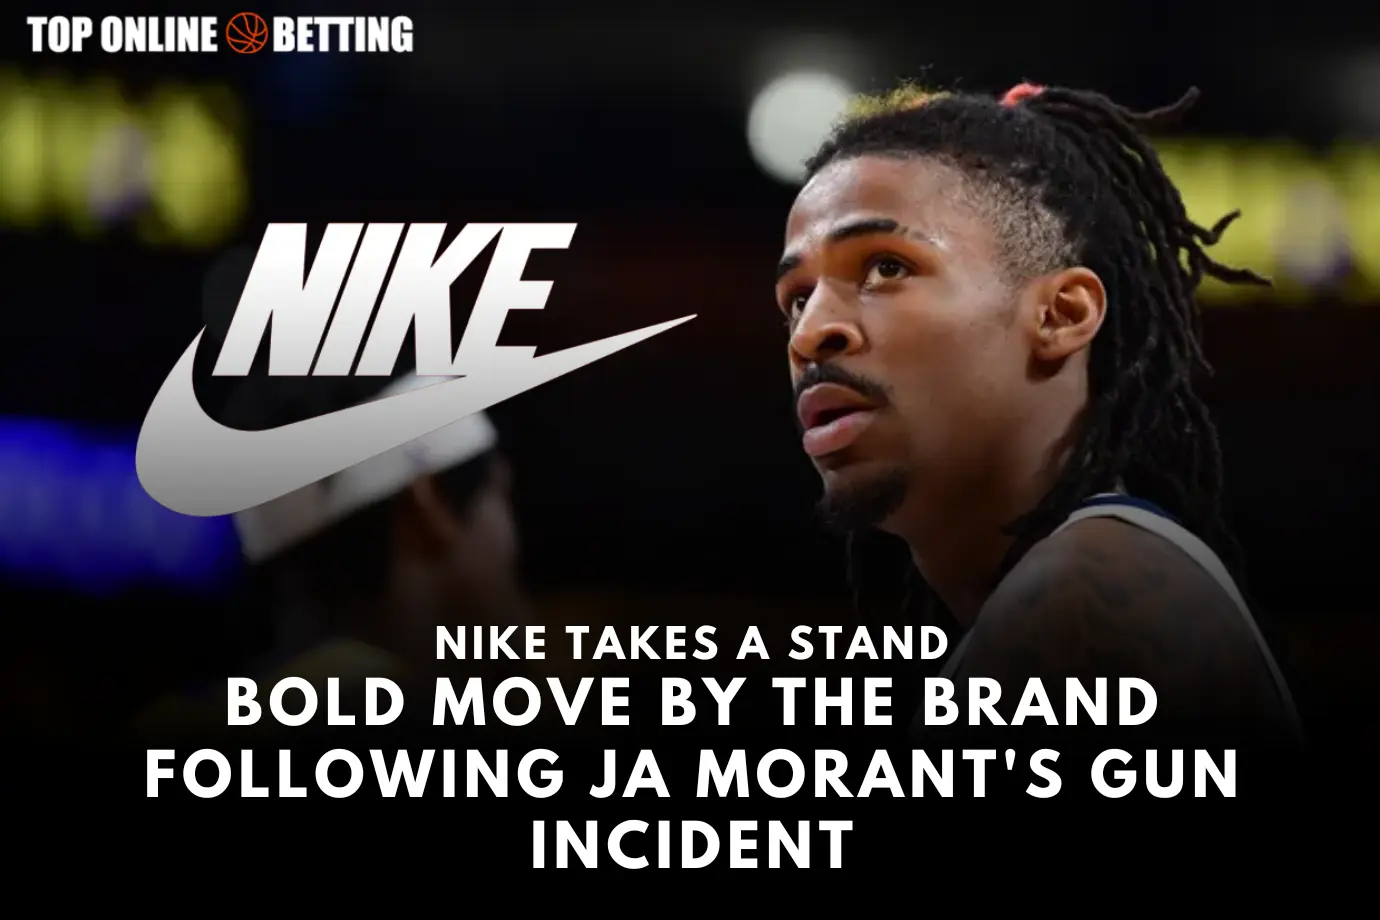 Nike Takes a Stand: Bold Move by the Brand Following Ja Morant's Gun Incident